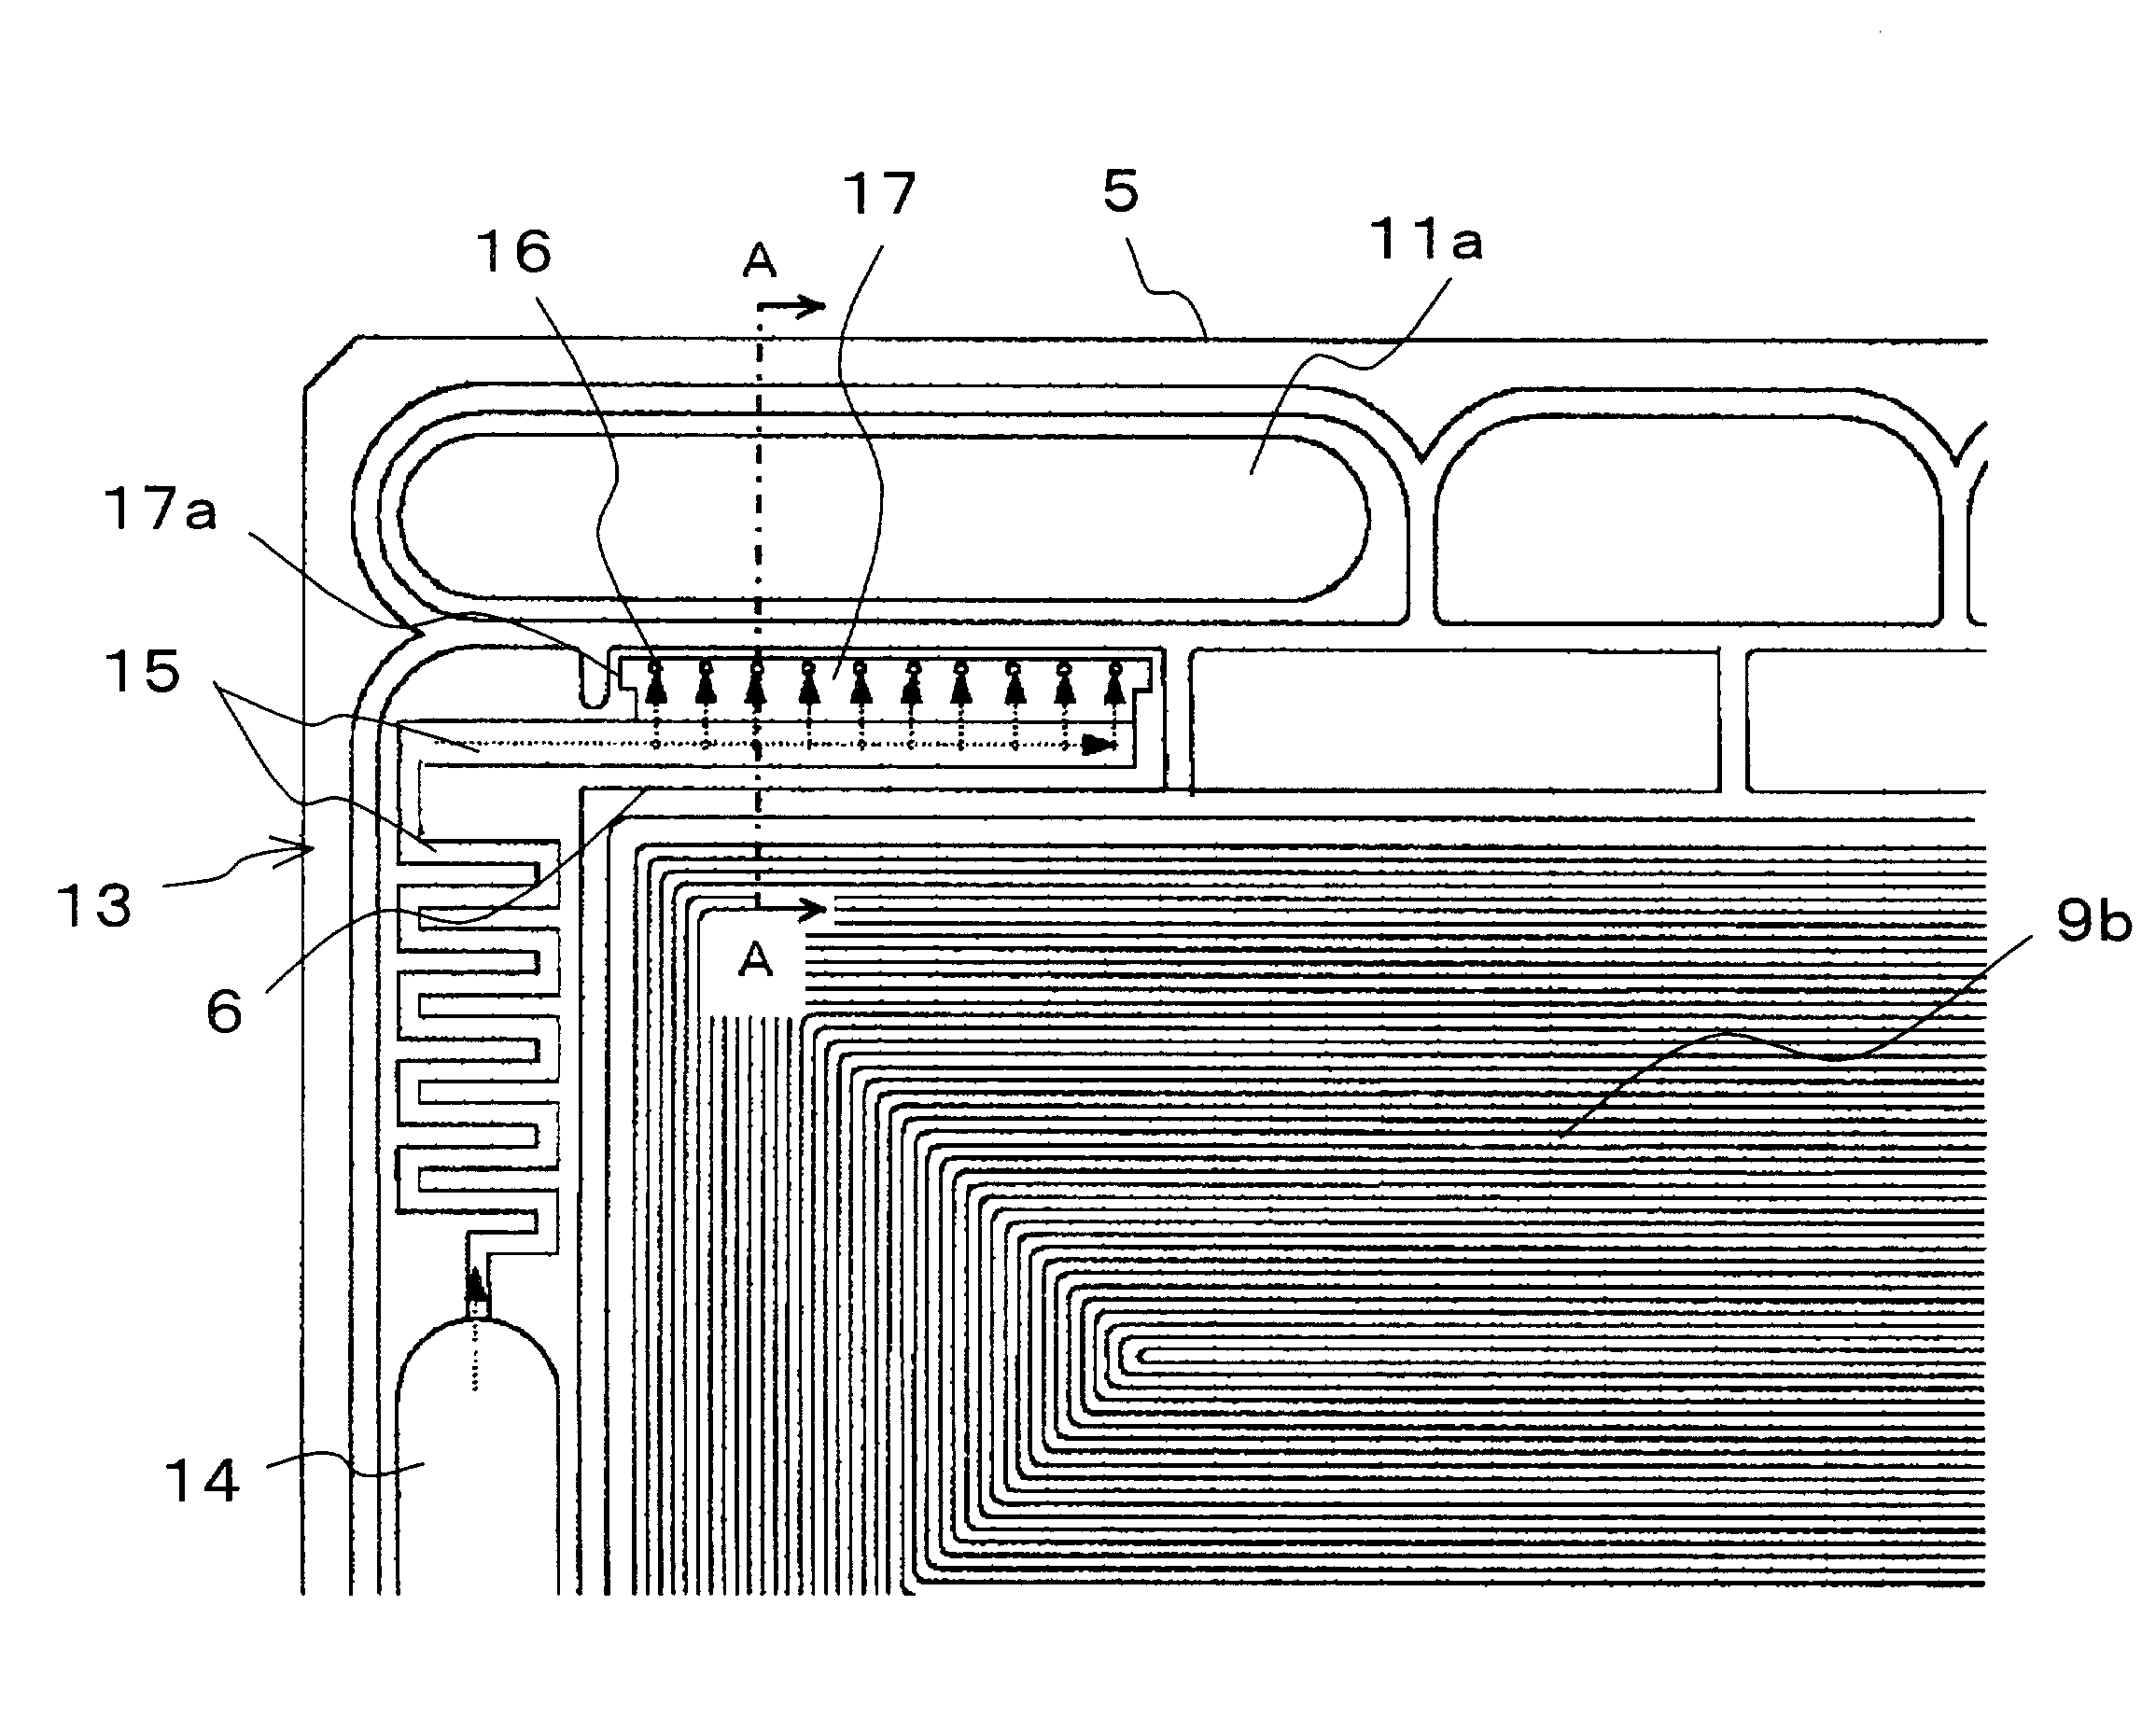 Polymer electrolyte fuel cell stack and method for operating the same and gas vent valve